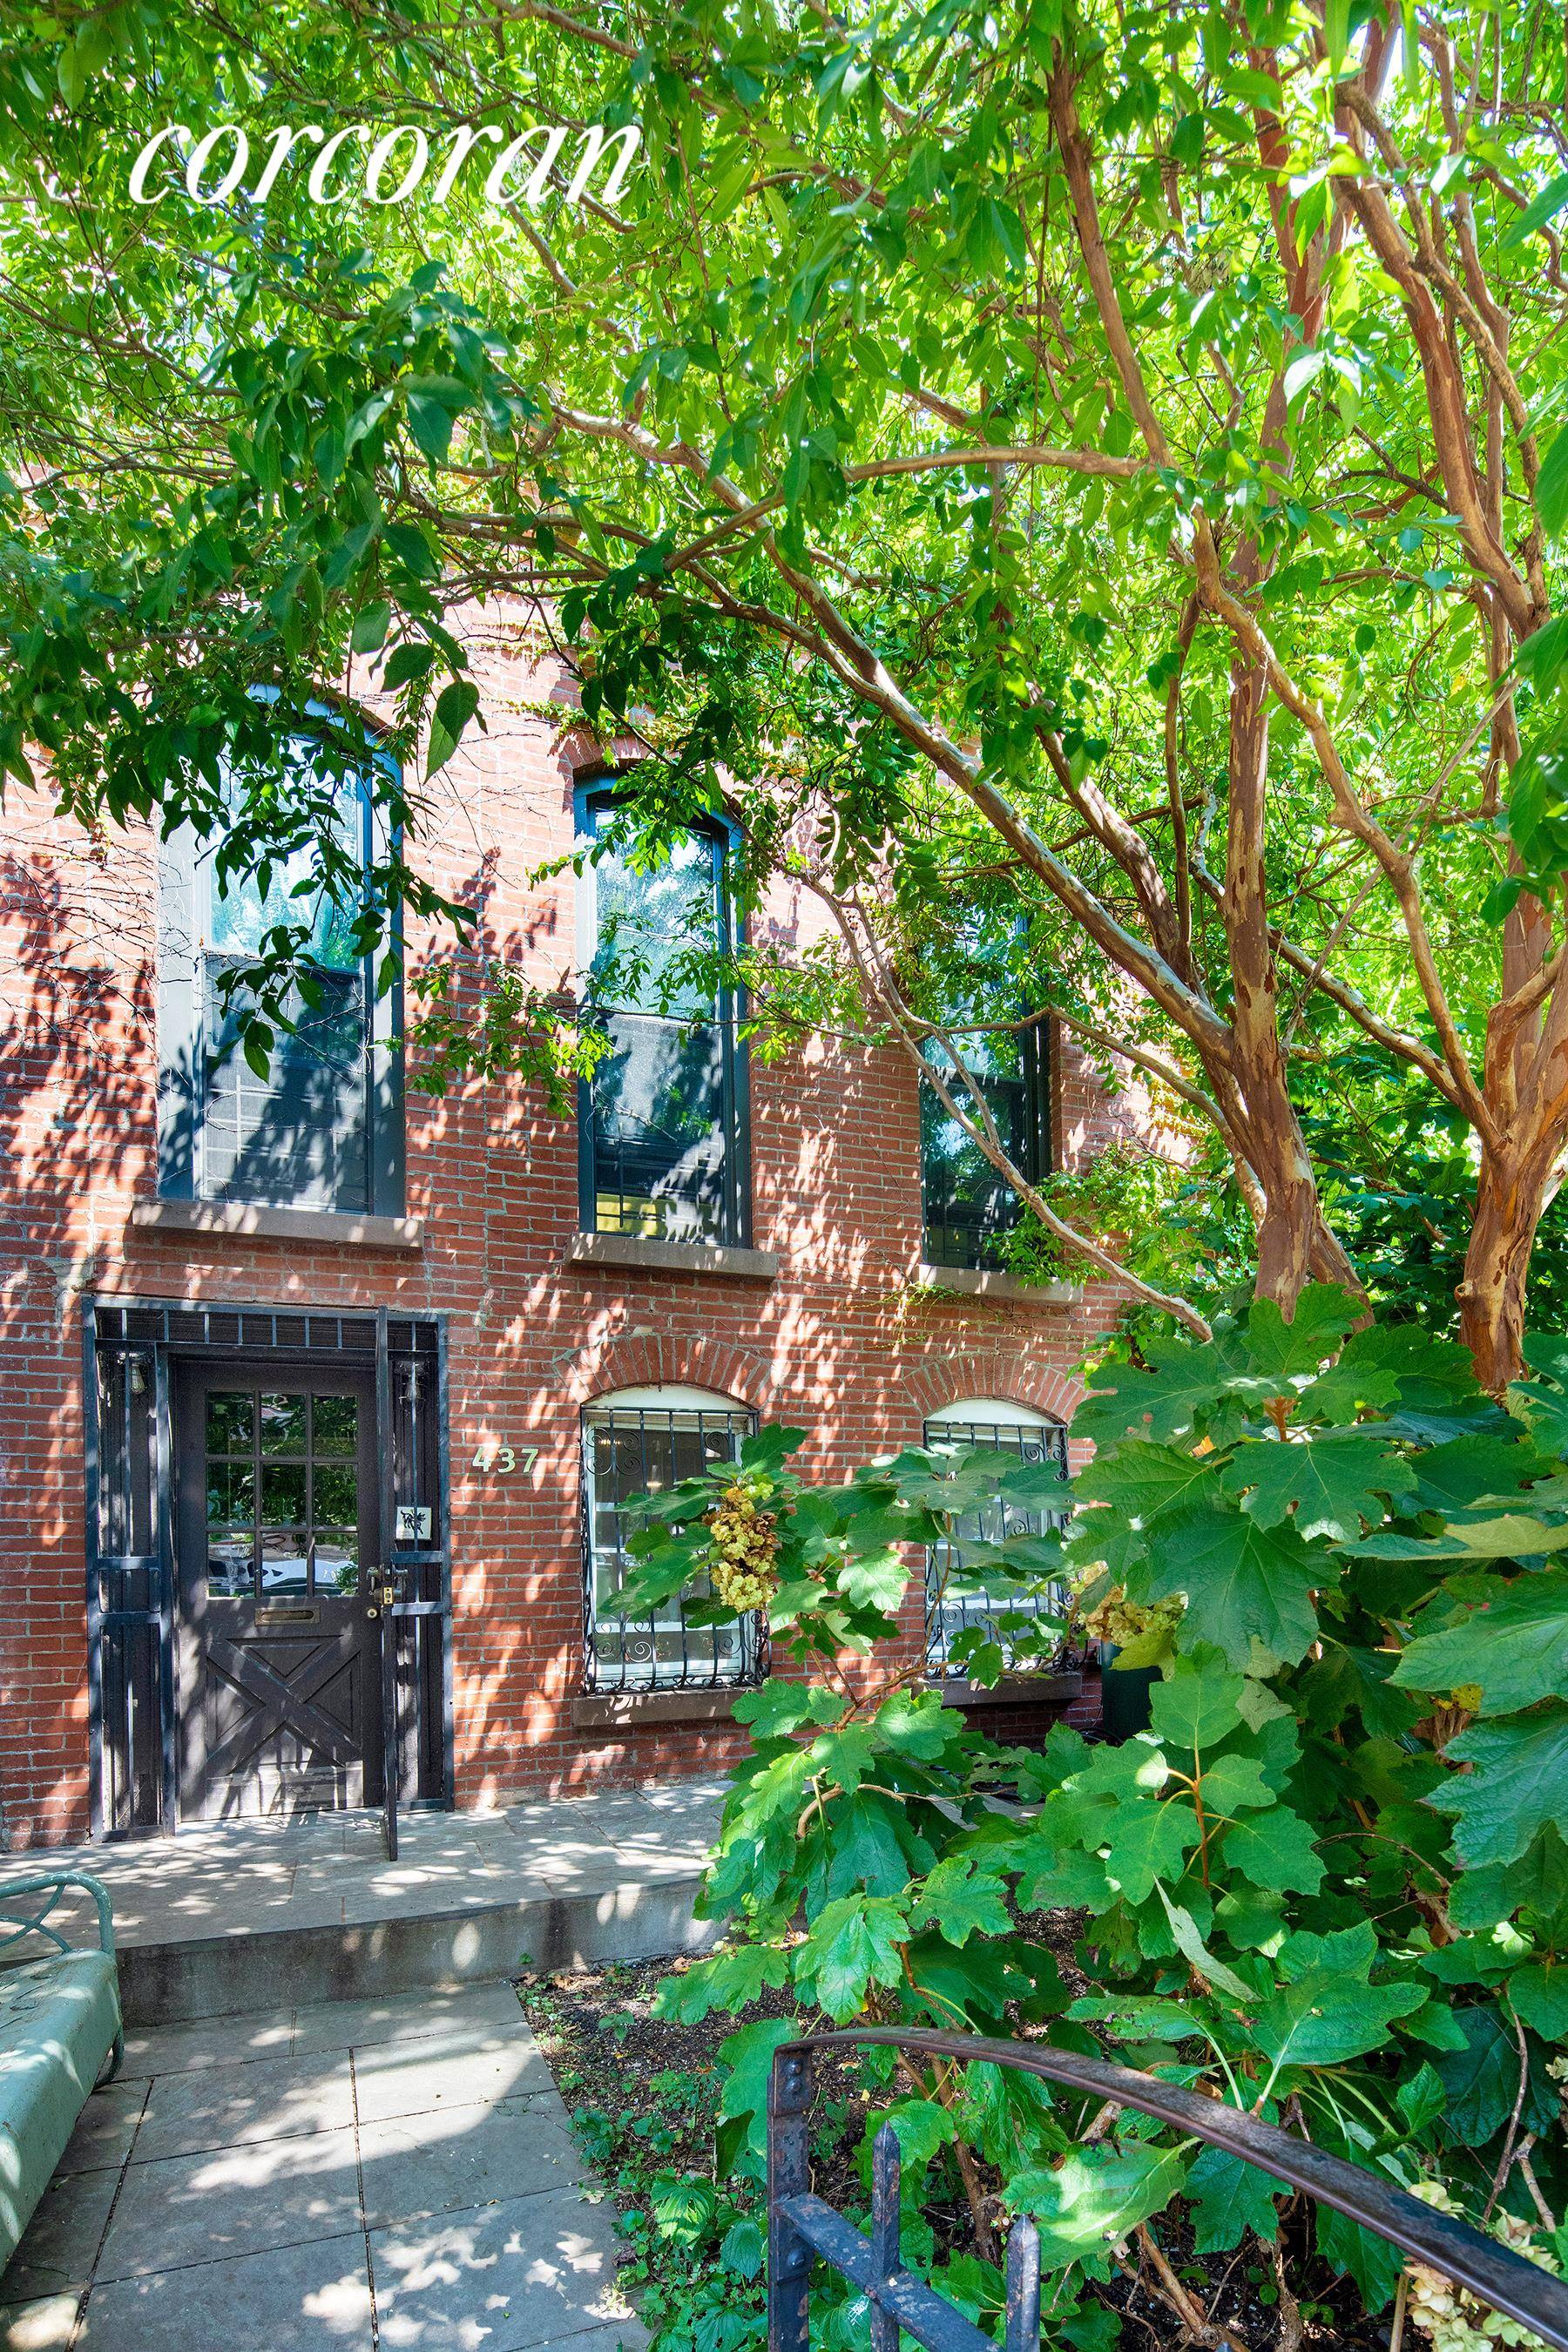 Nestled away on a quiet, Boerum Hill block rests this charming, ivy covered townhouse with beautifully landscaped front and back gardens.